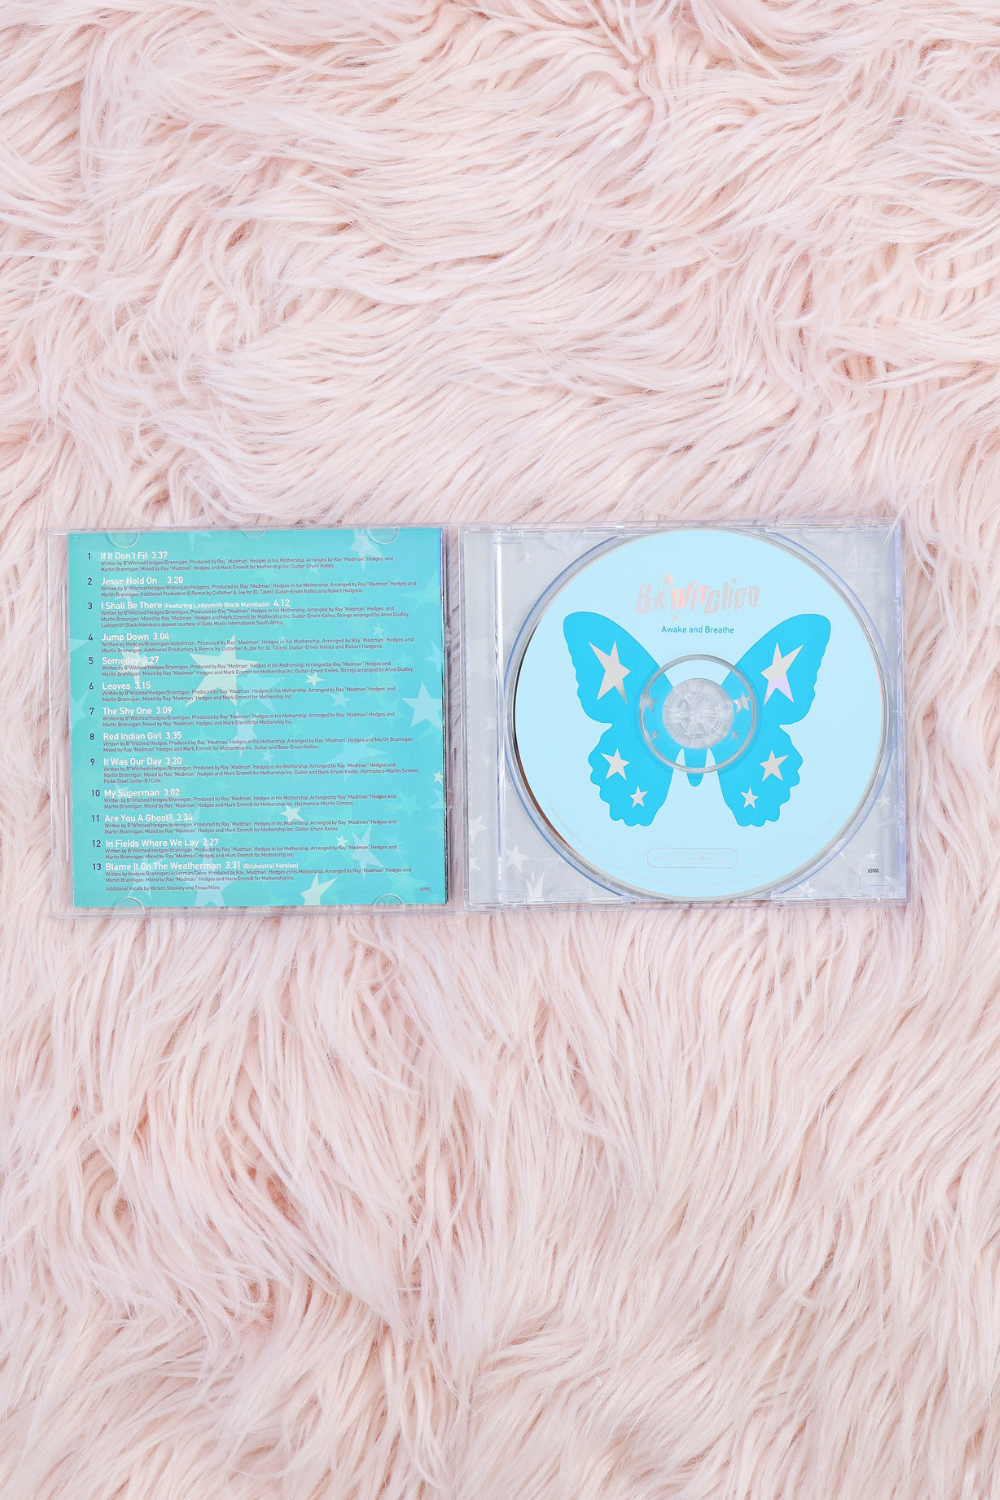 BEWITCHED: AWAKE AND BREATHE CD *